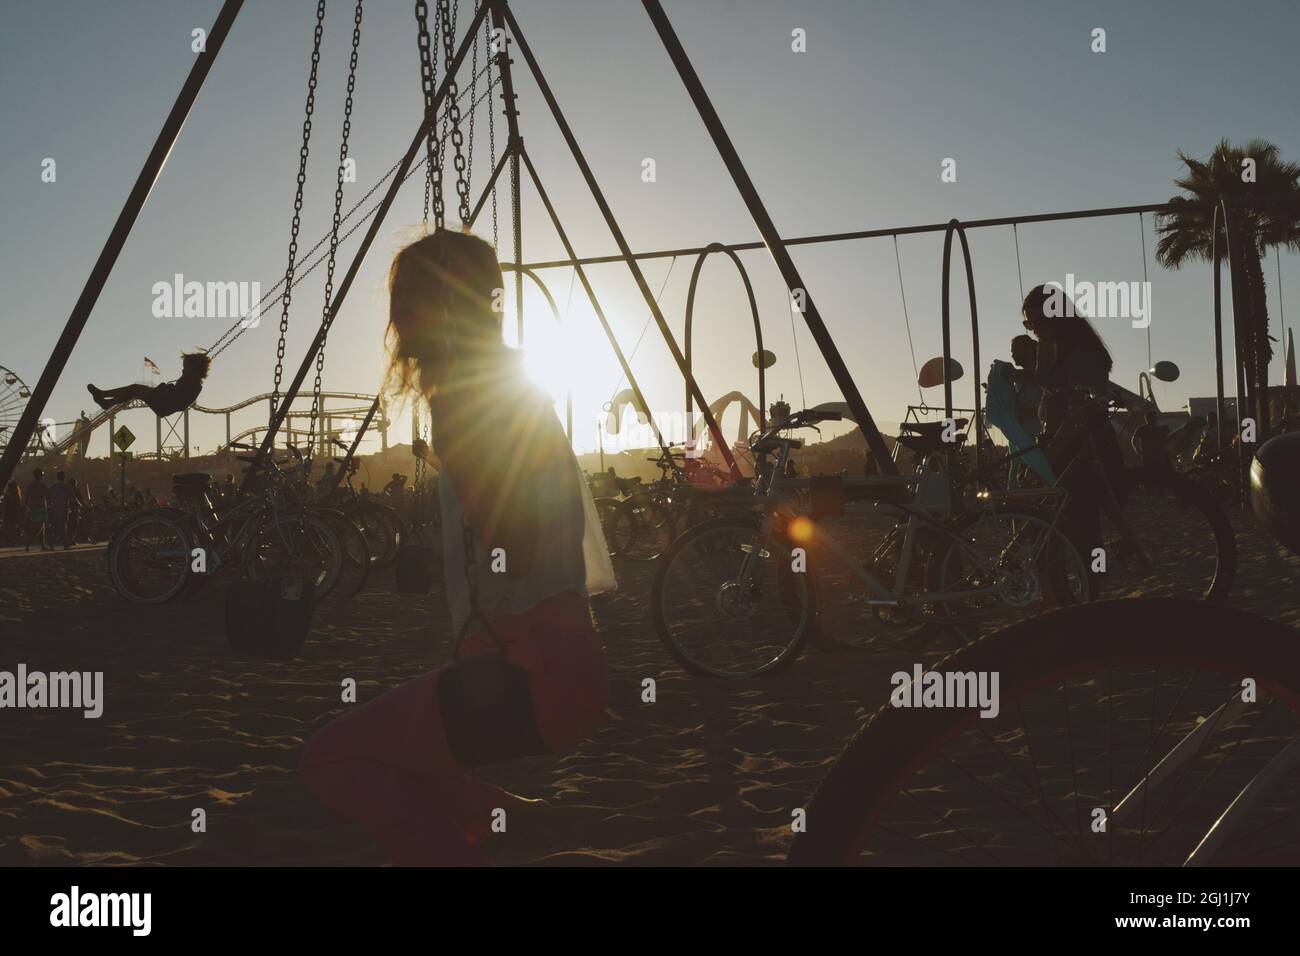 A silhouette of a woman on the swings at sunset, Muscle Beach Santa Monica, USA Stock Photo